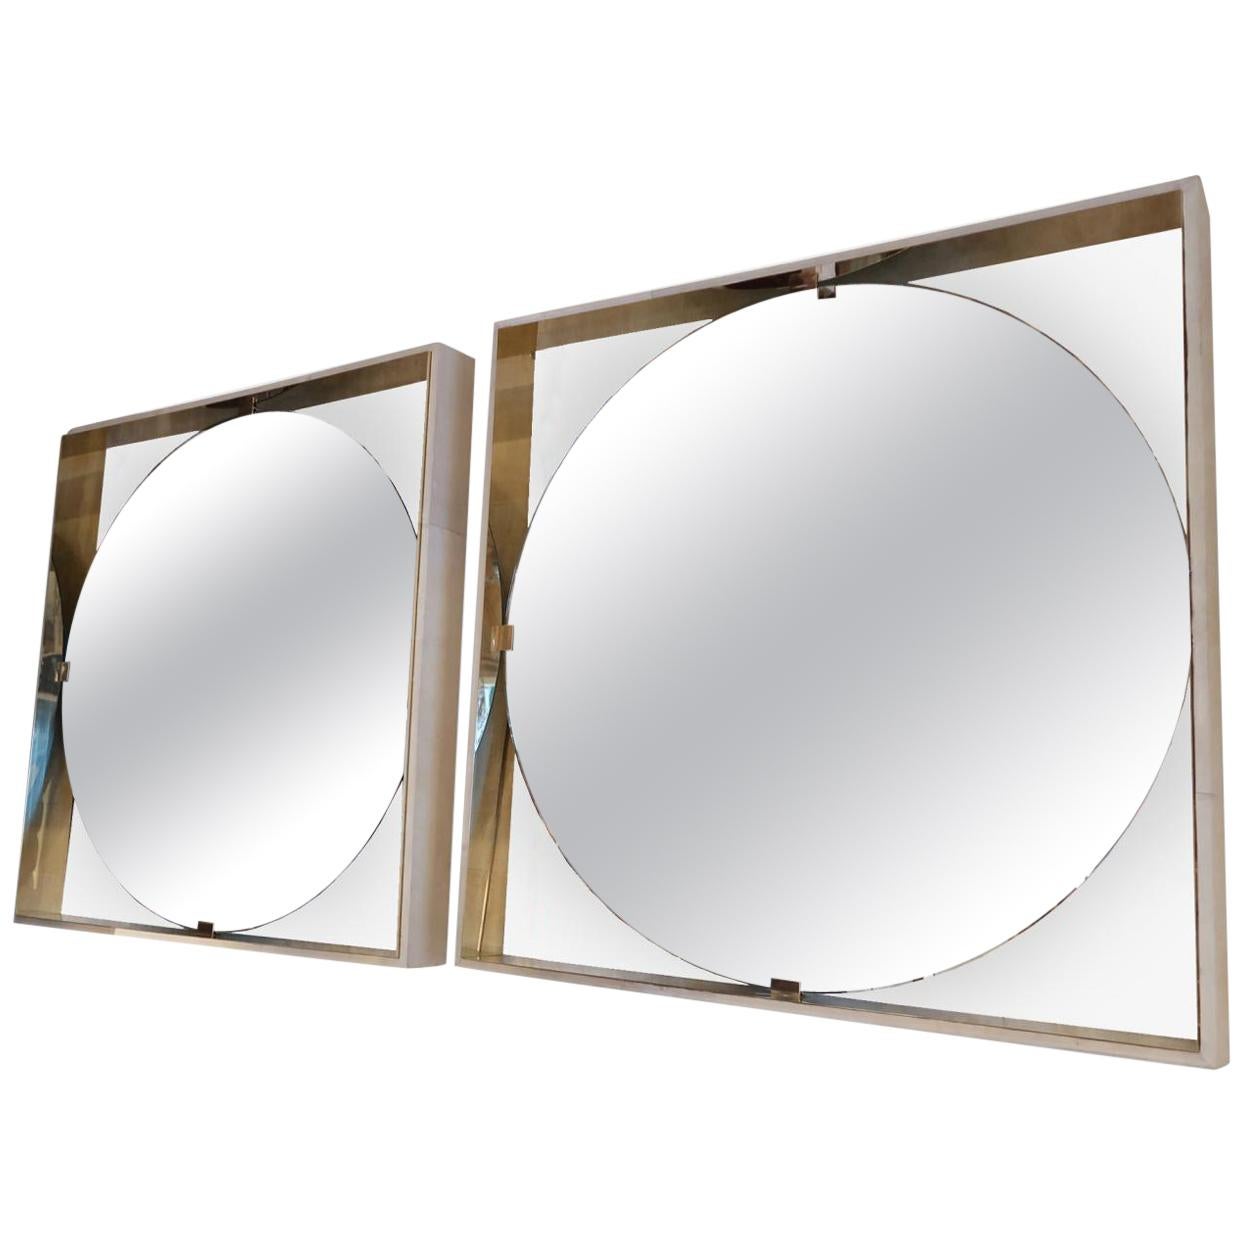 Pair of Lacquered Parchment and Brass Modern Square Wall Mirrors, Italy 2000 For Sale